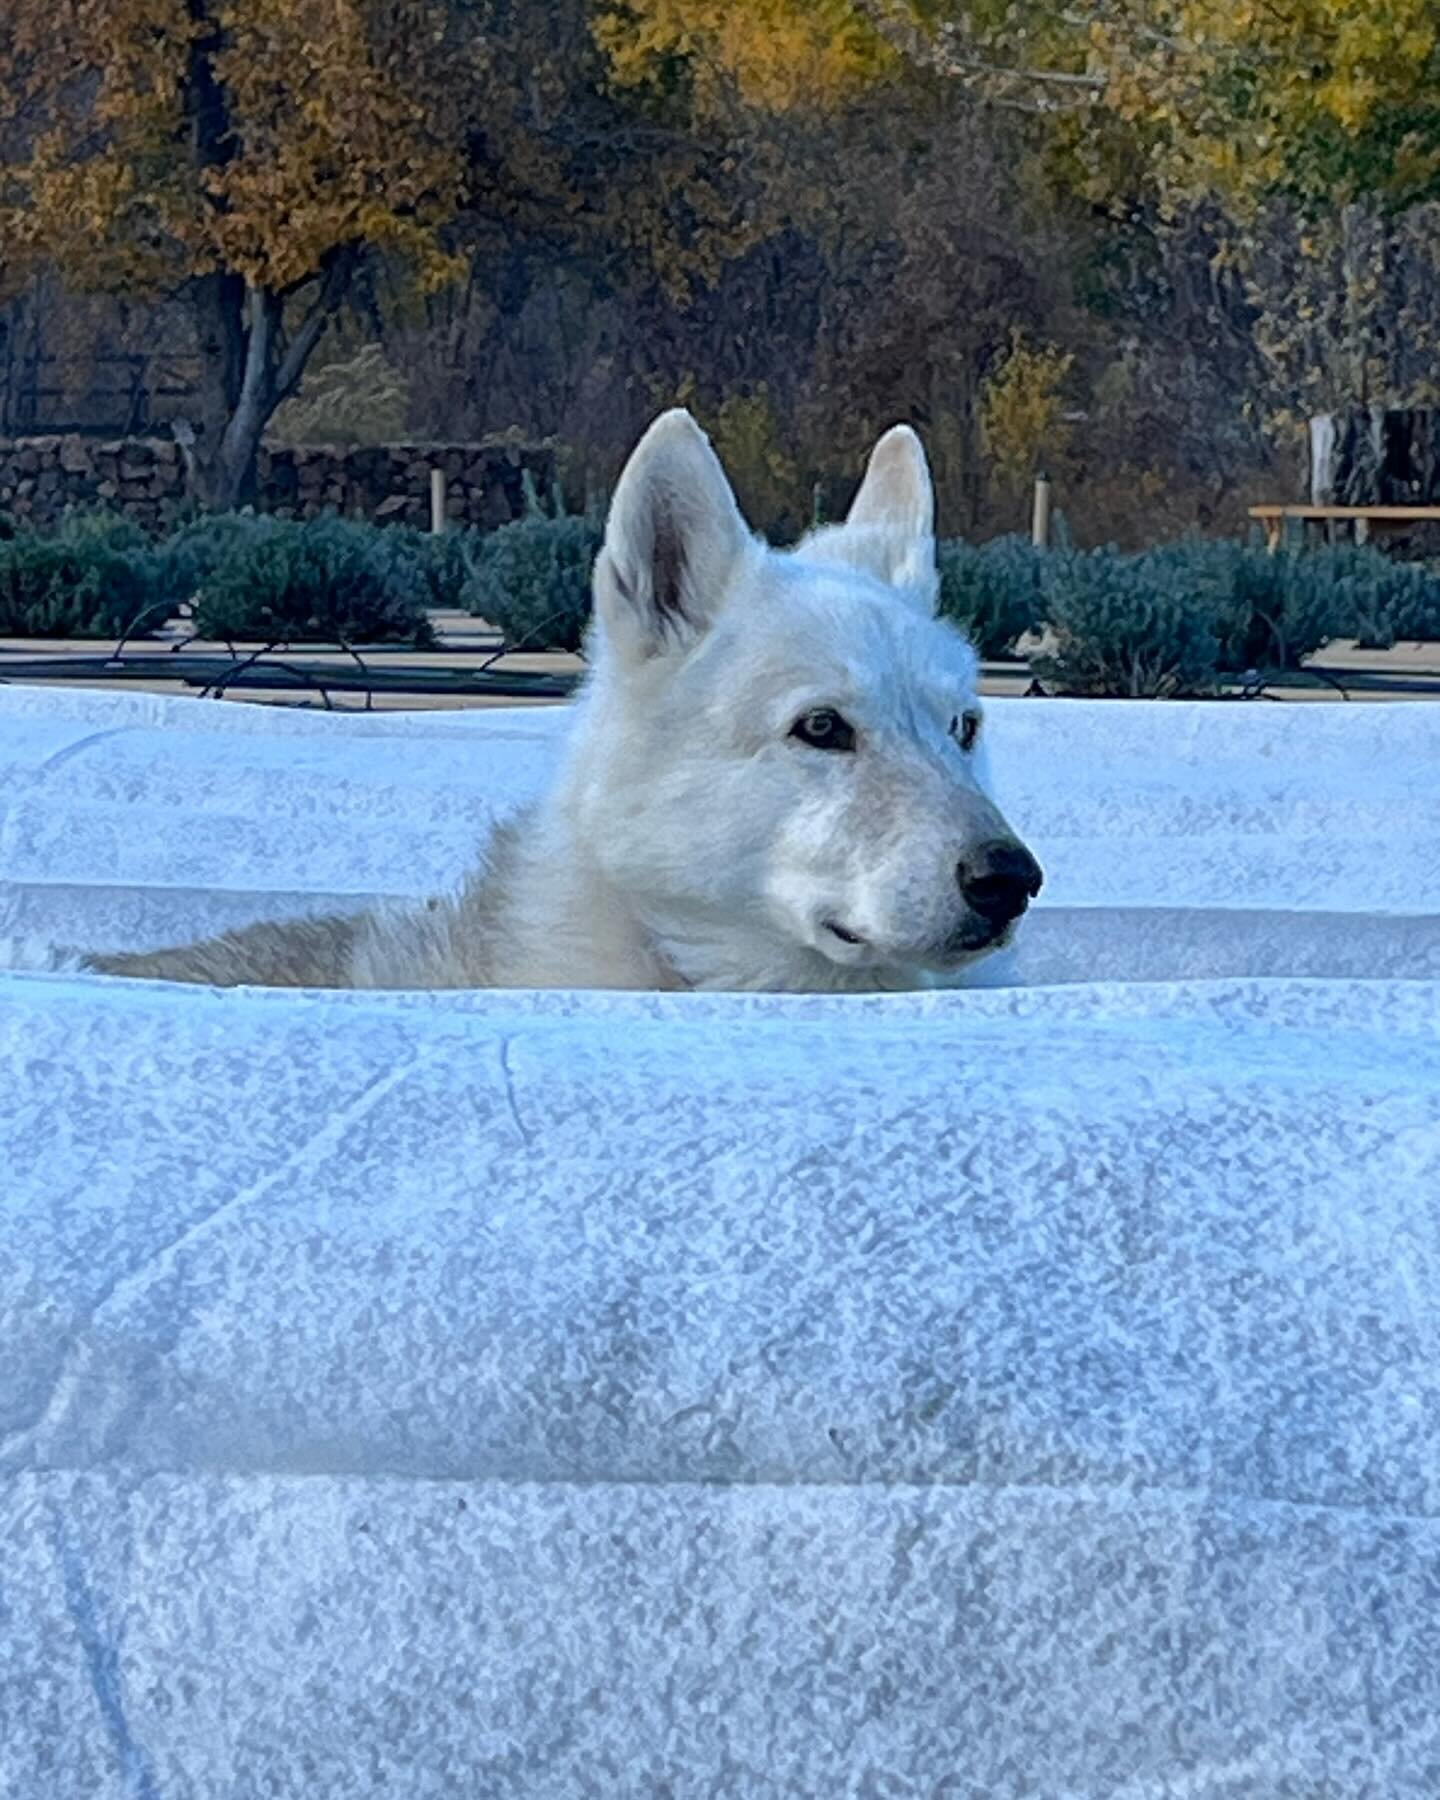 Our buddy Jet is terrible help in getting frost blankets on but&hellip; he does knows a secret! FREE SHIPPING through Dec 10th using the discount code on our website homepage. Visit coloradomountainlavender.com and claim yours.